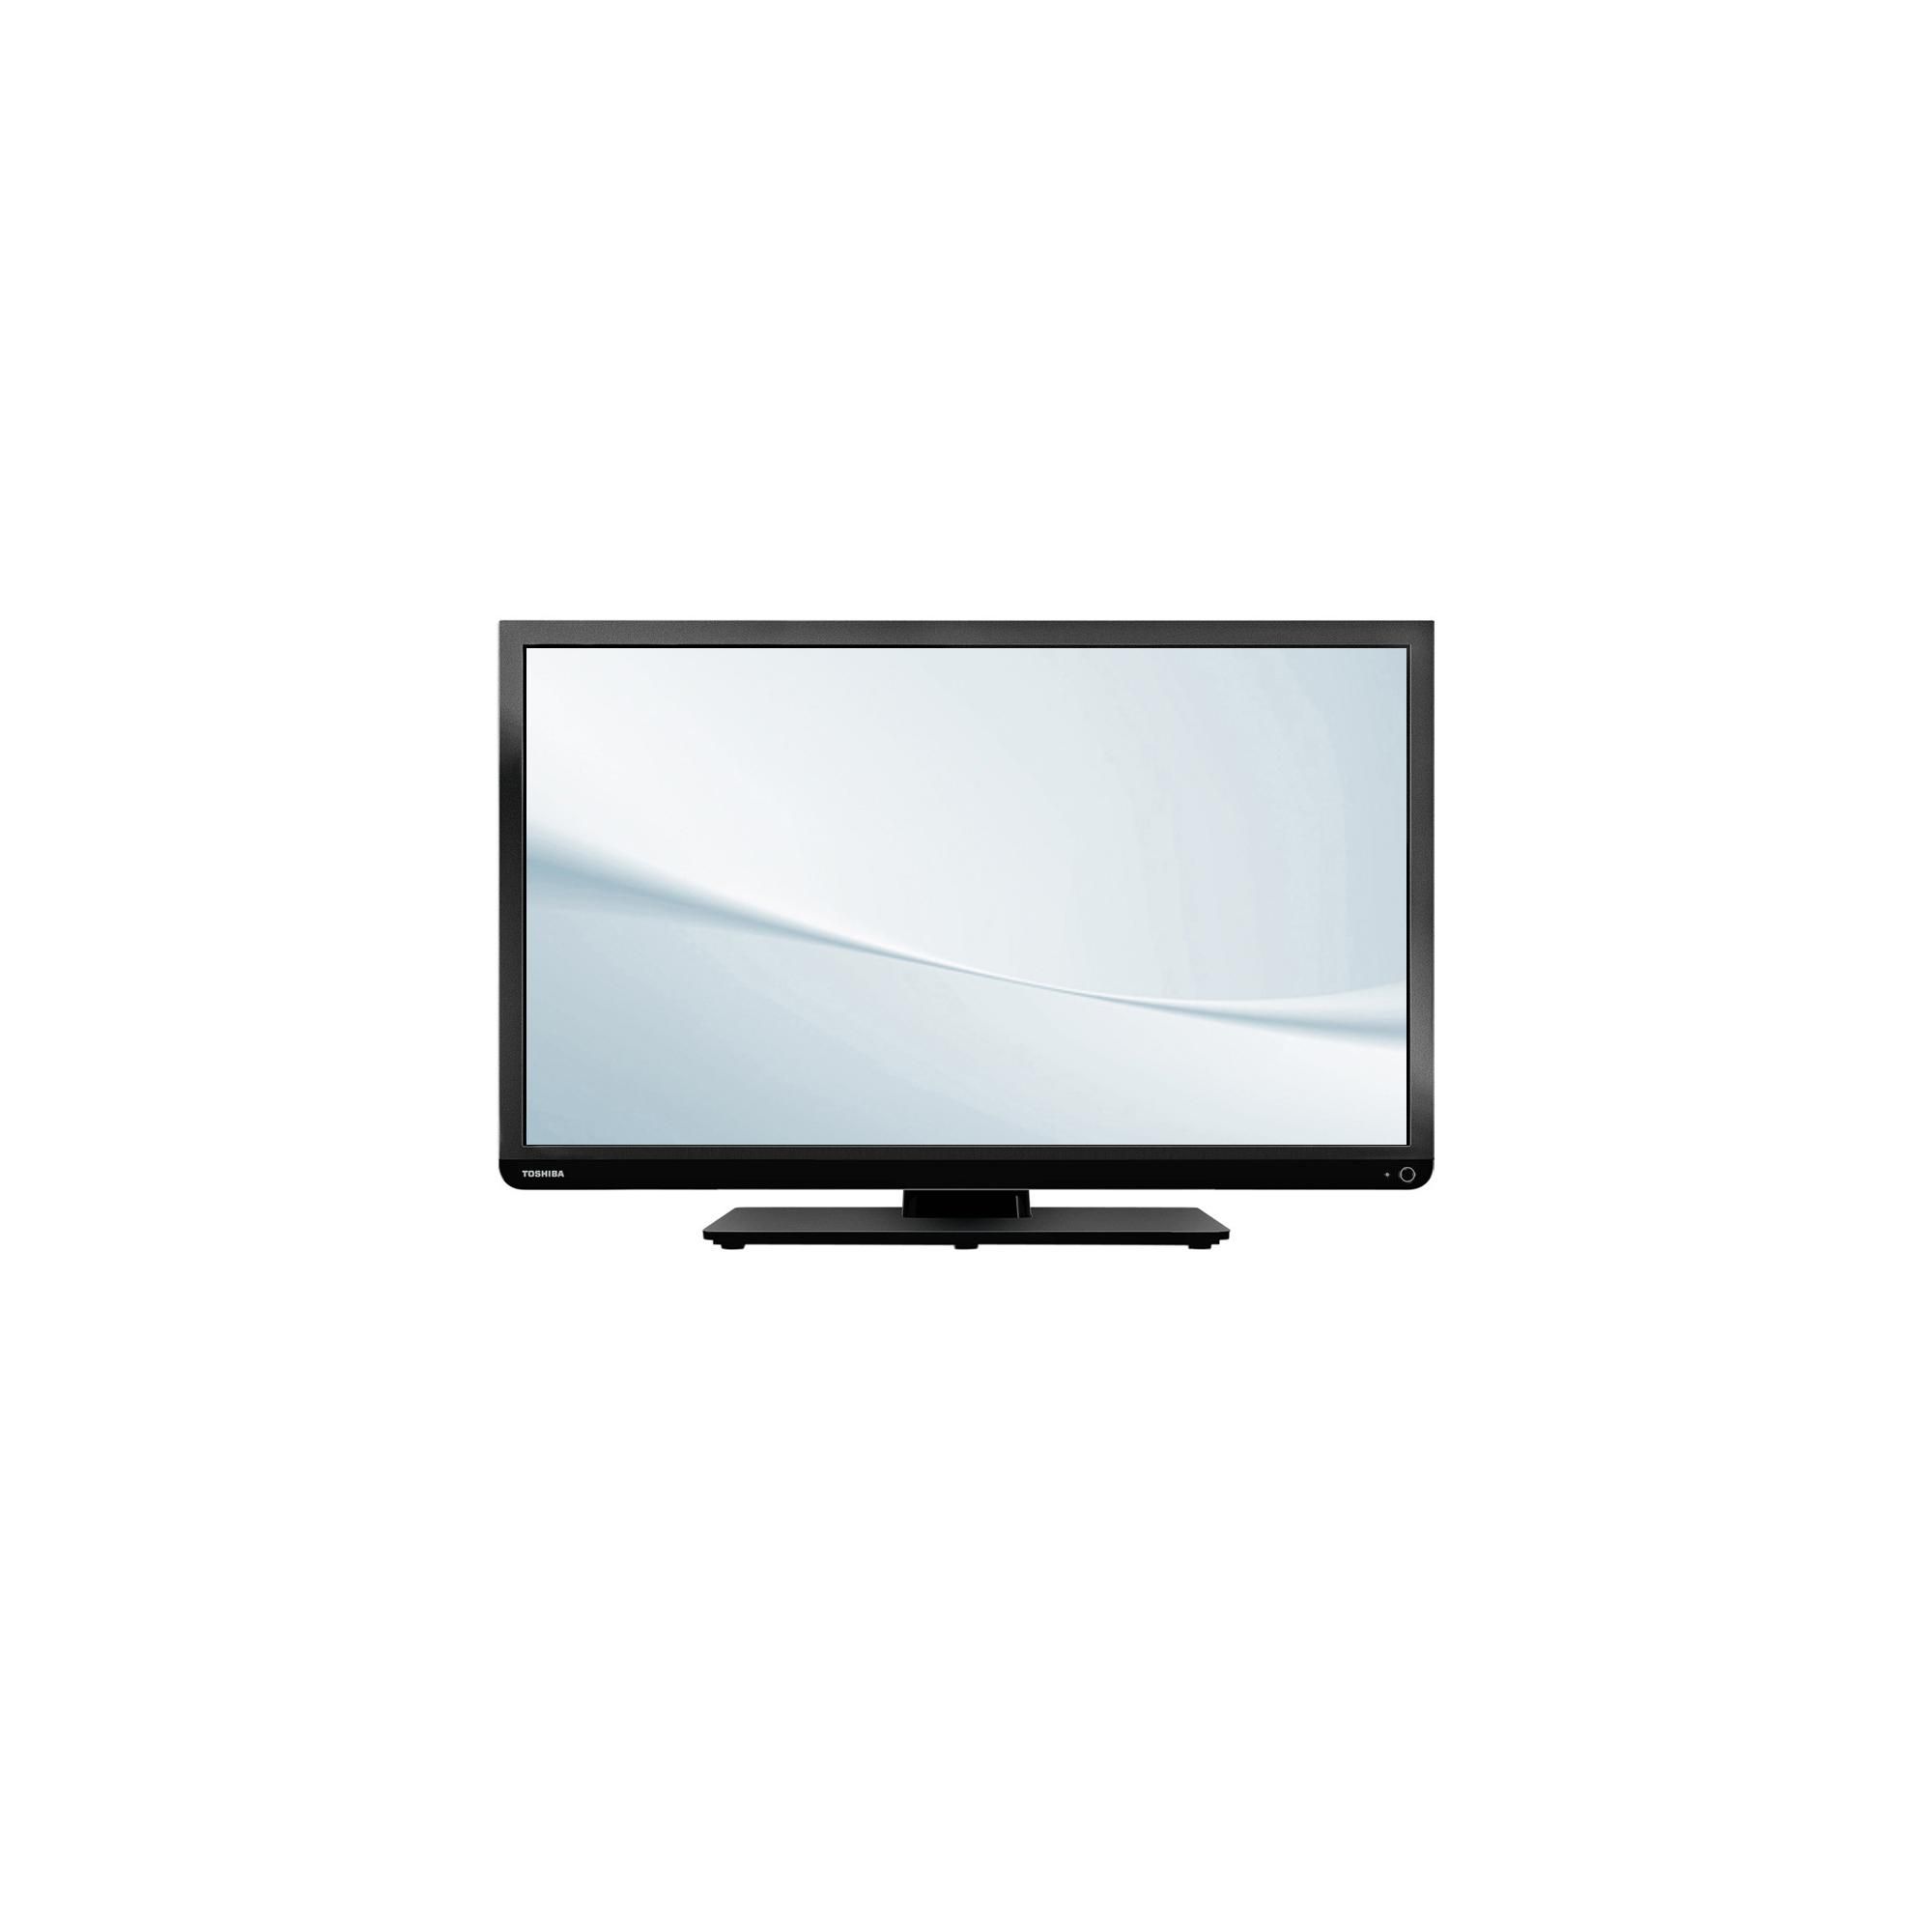 Toshiba 32D1333B 32 Inch 720P HD Ready LED Backlit LCD TV/DVD Combi with Freeview